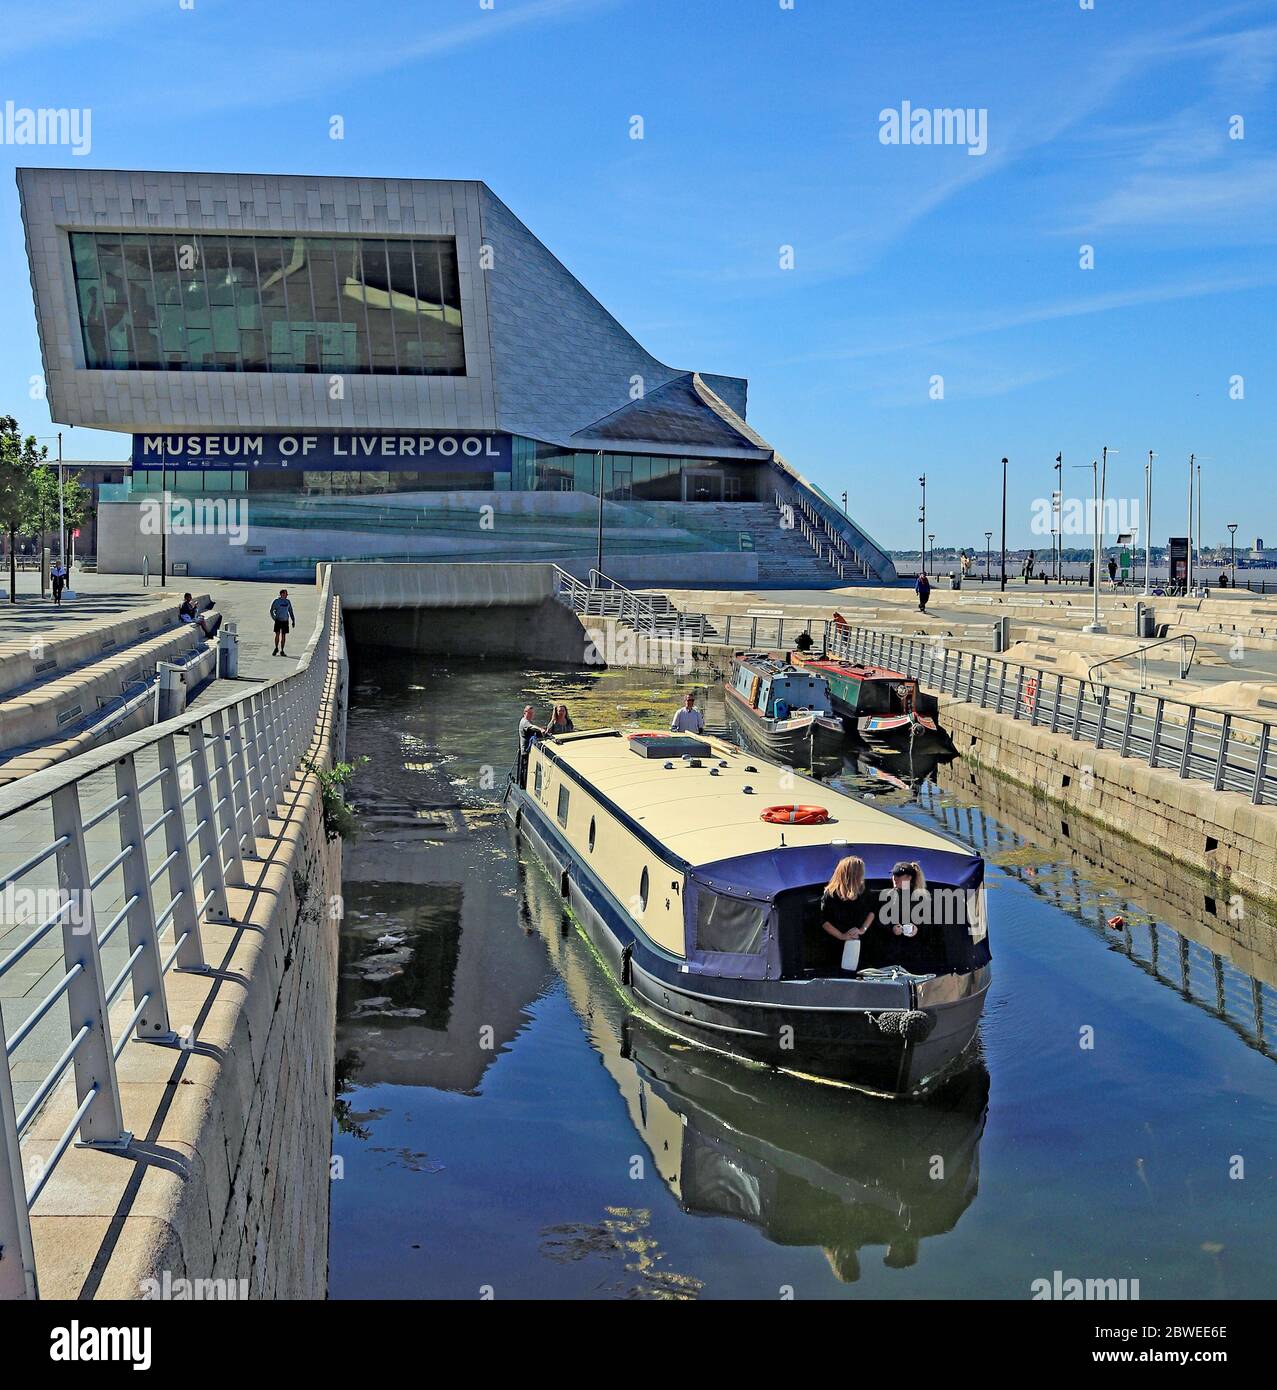 On the 29.5.2020 three canal boats, with the permission and arranged with the CRT left the docks in Liverpool, passing under the Museum of Liverpool Stock Photo